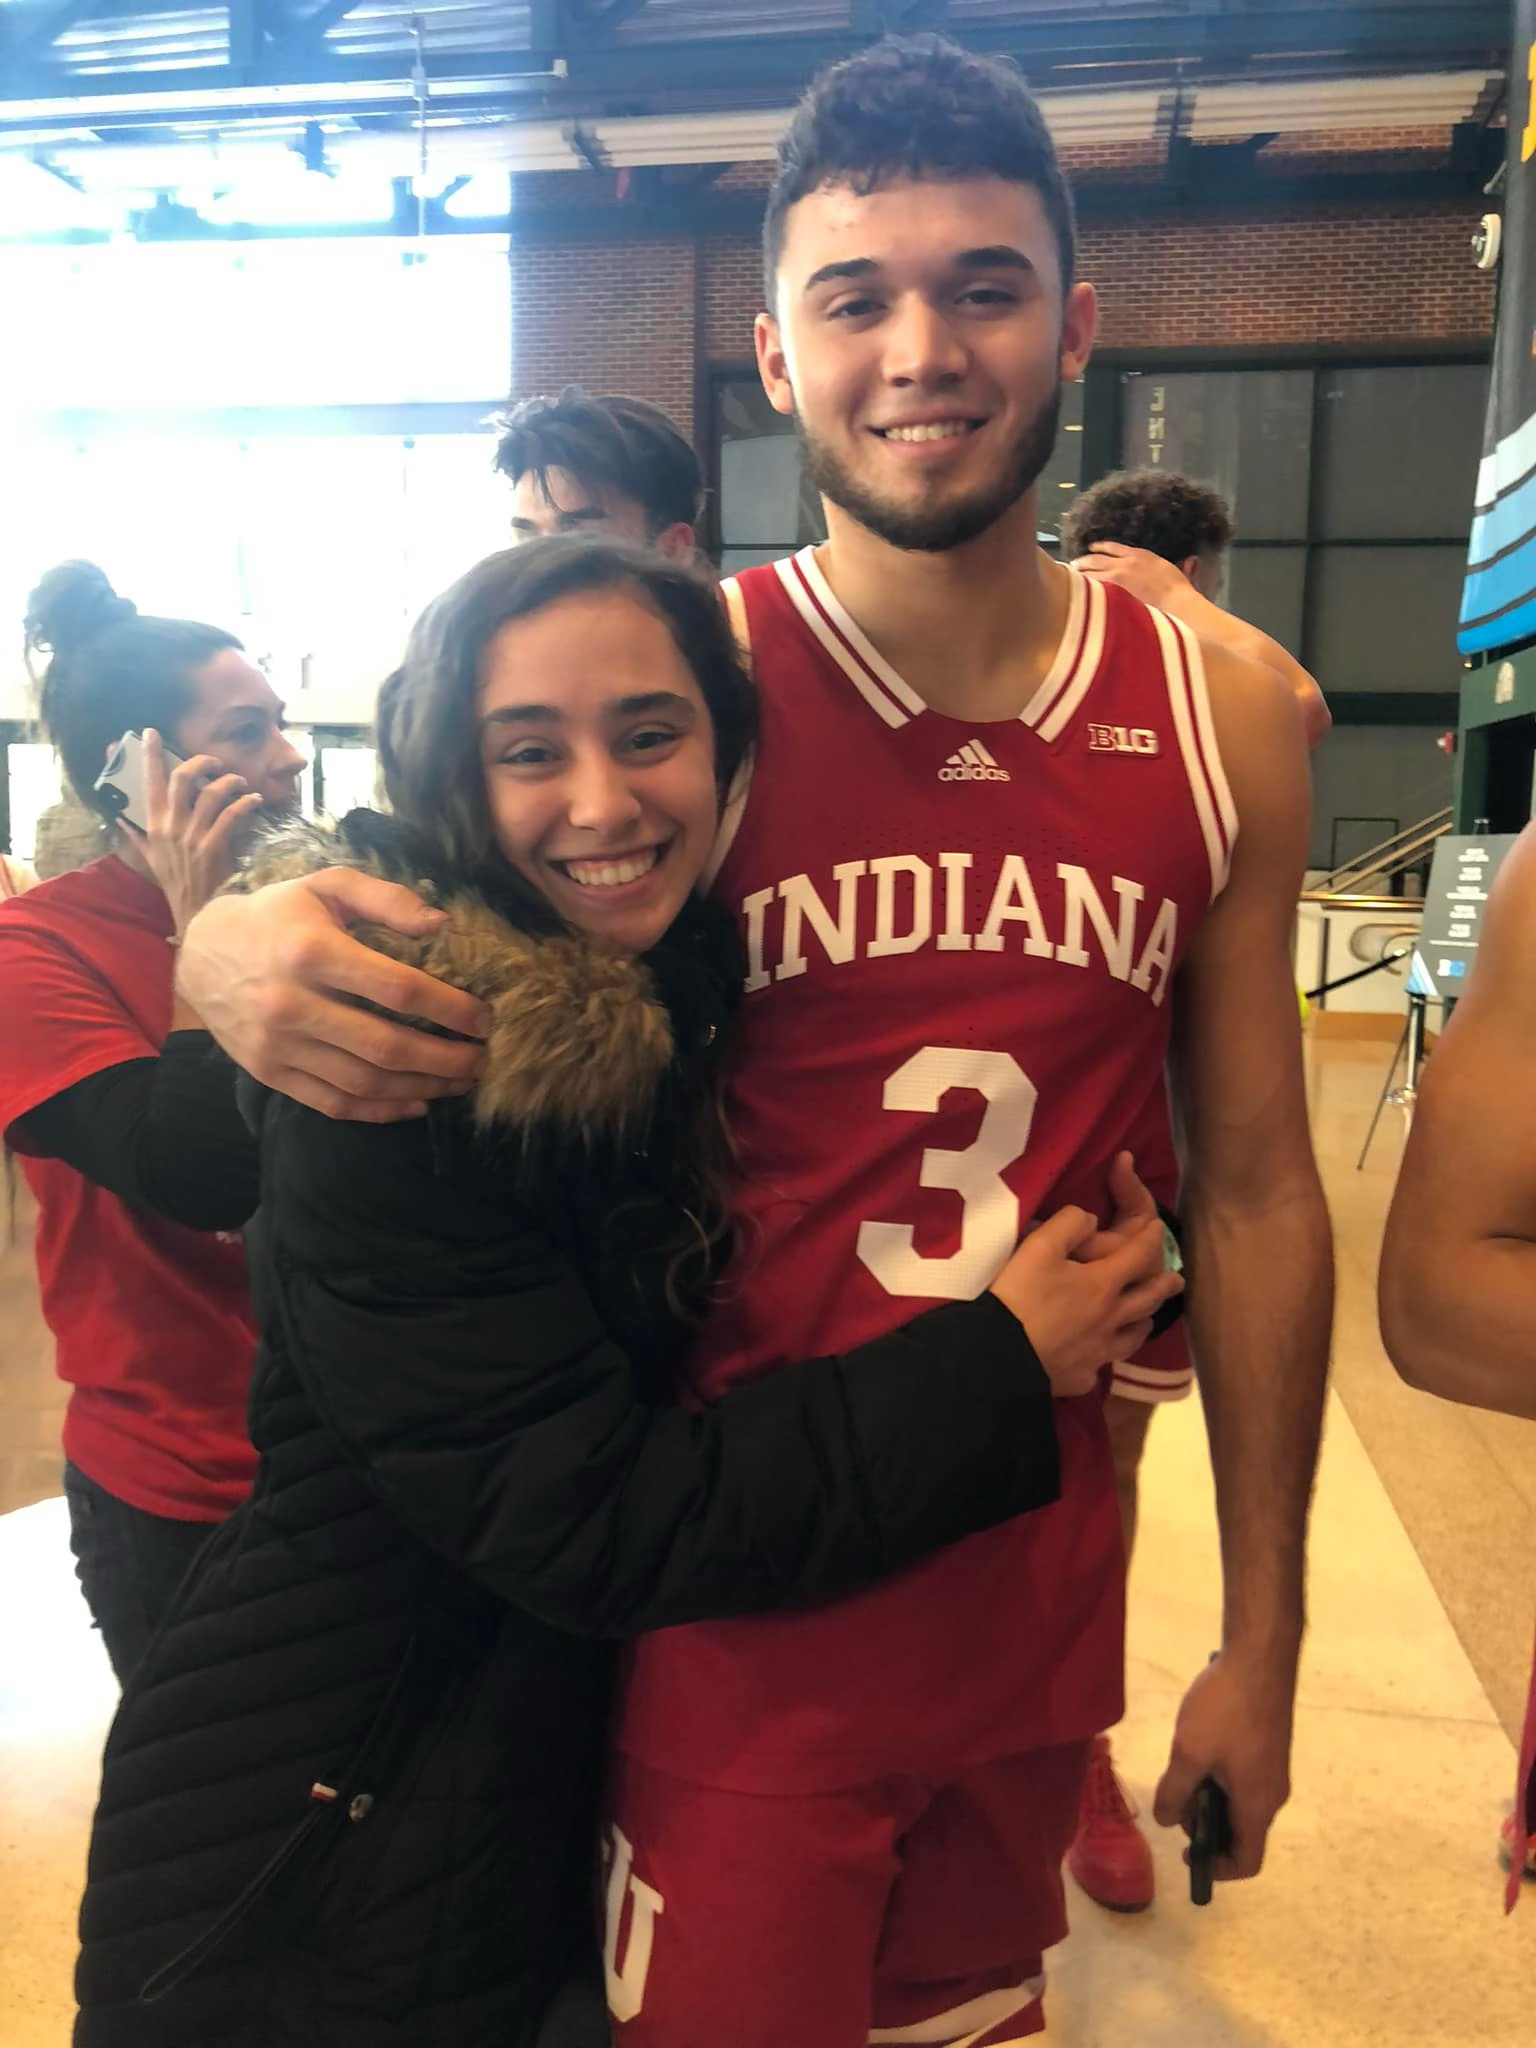 PHOTO: Anthony Leal, an Indiana University basketball player, poses with his sister Lauren Leal.